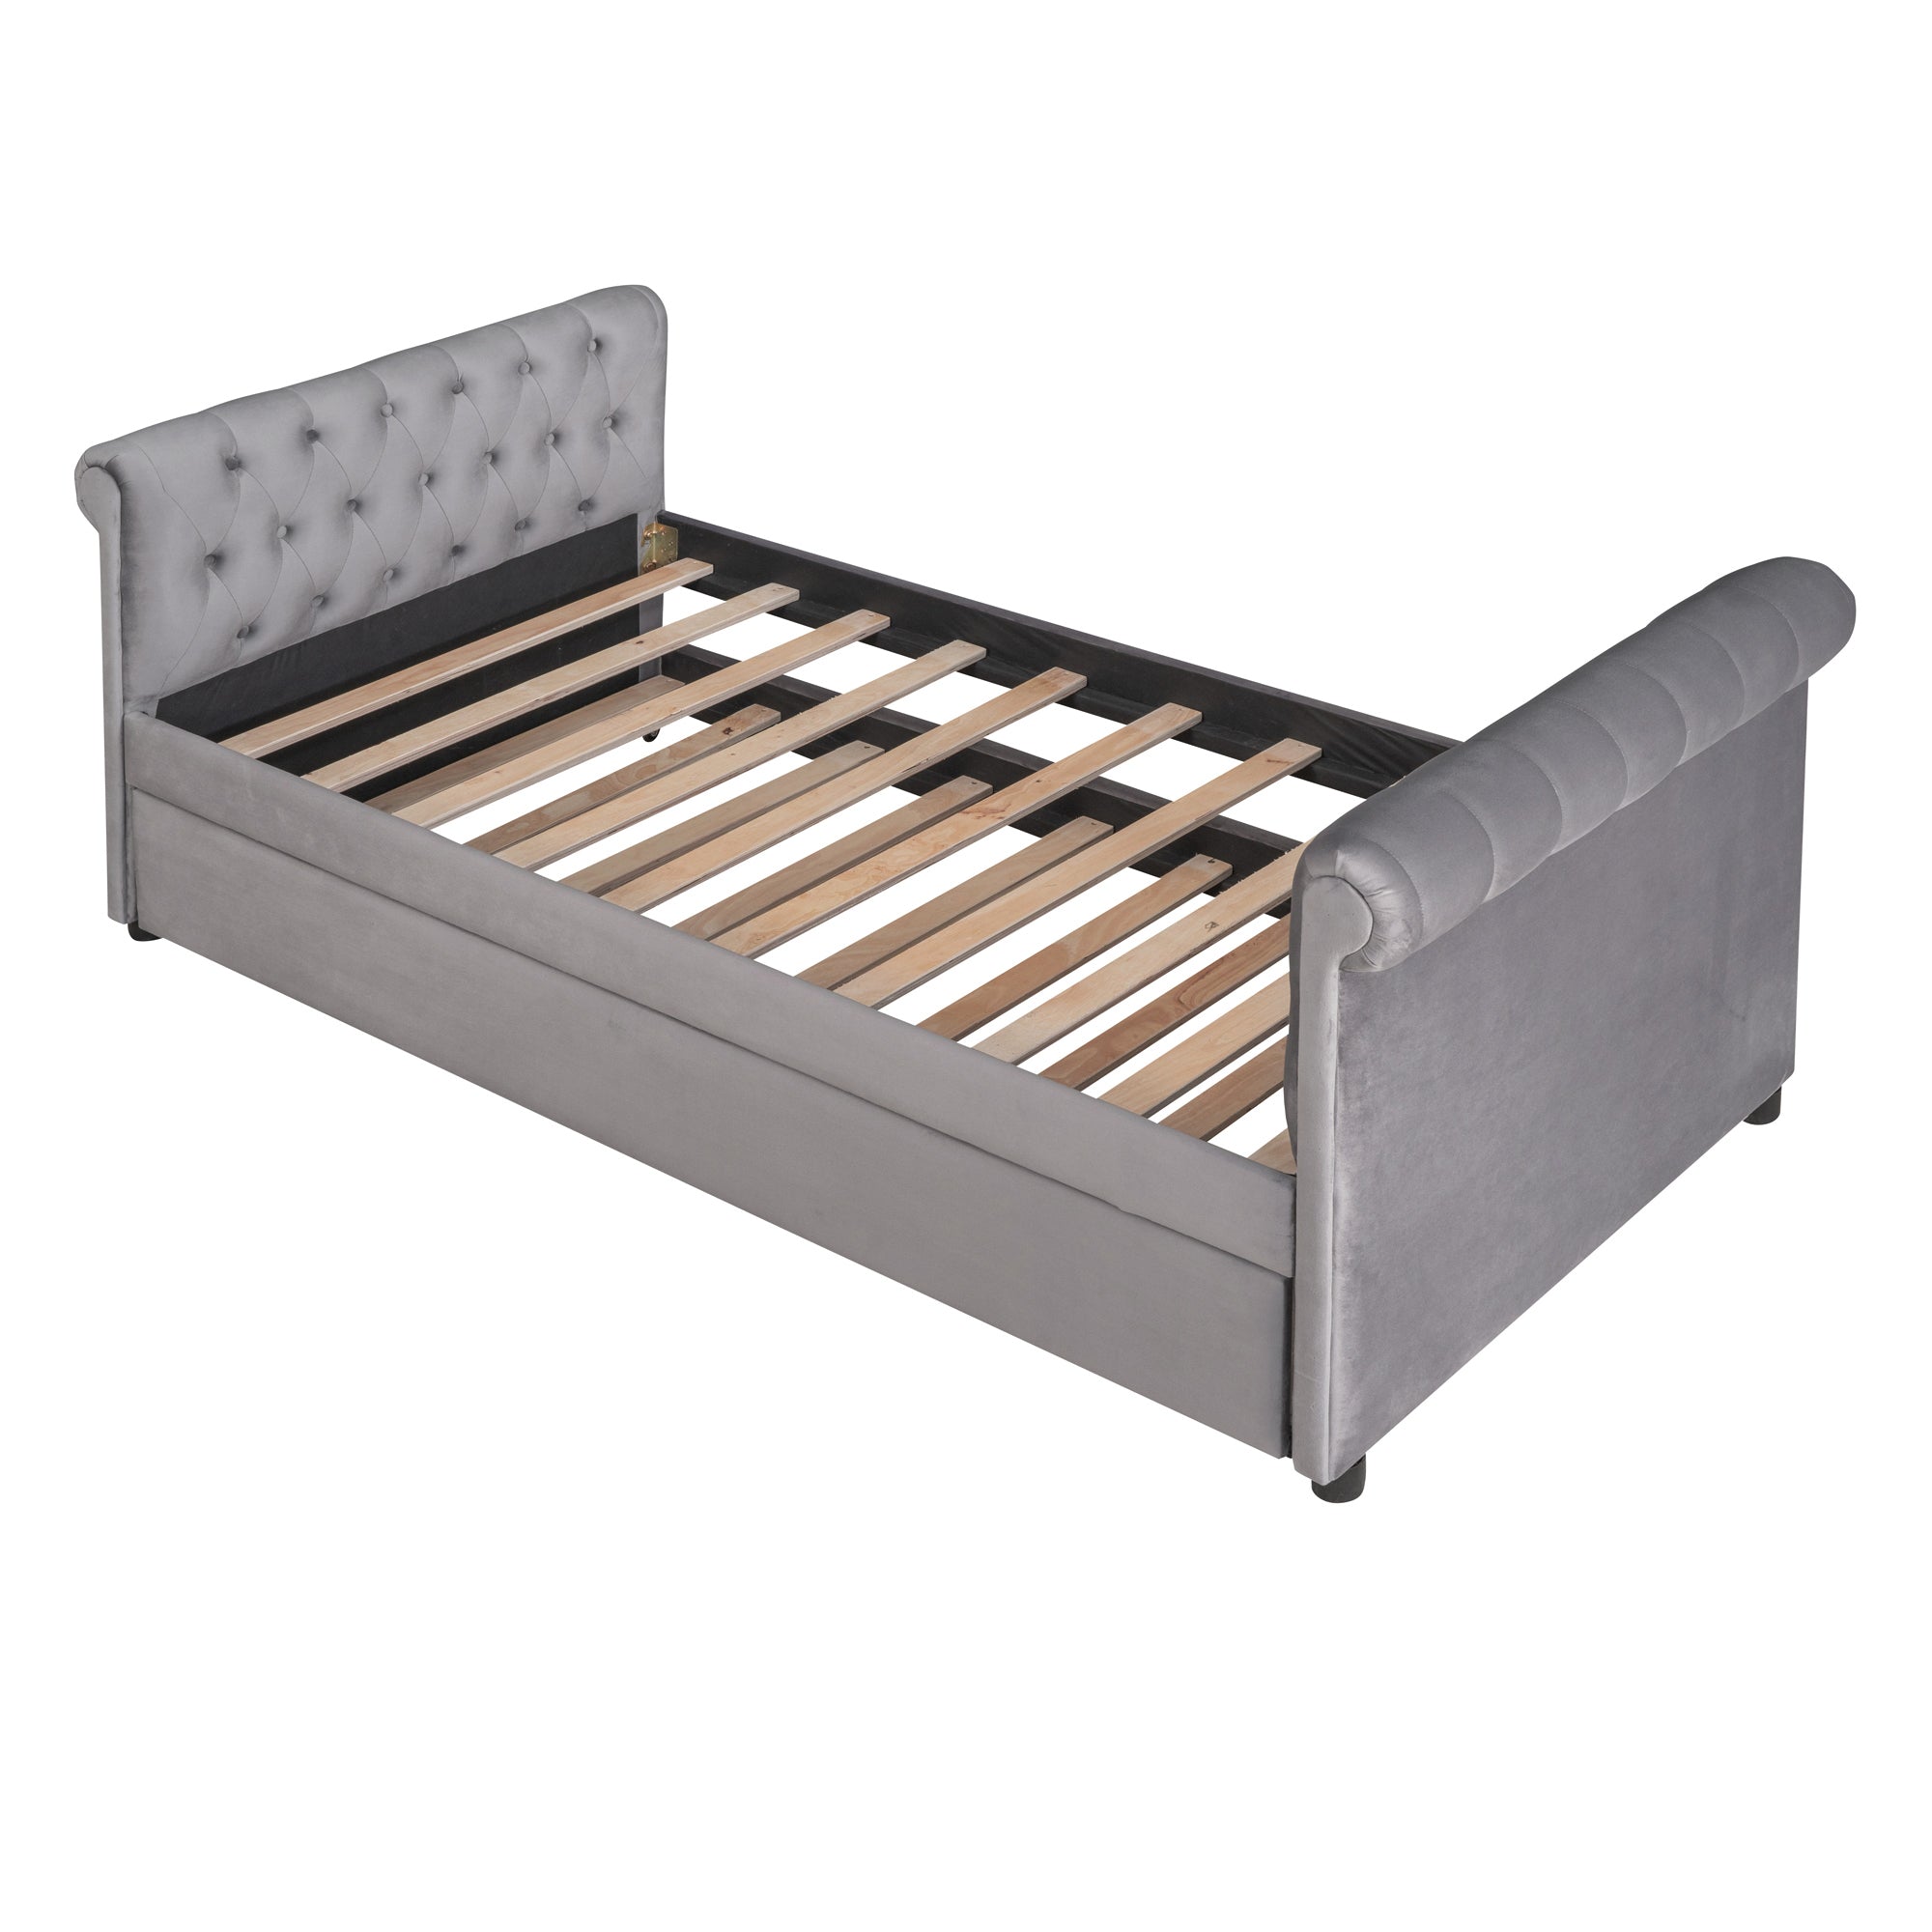 Twin Size Upholstered daybed with Trundle, Wood Slat gray-upholstered